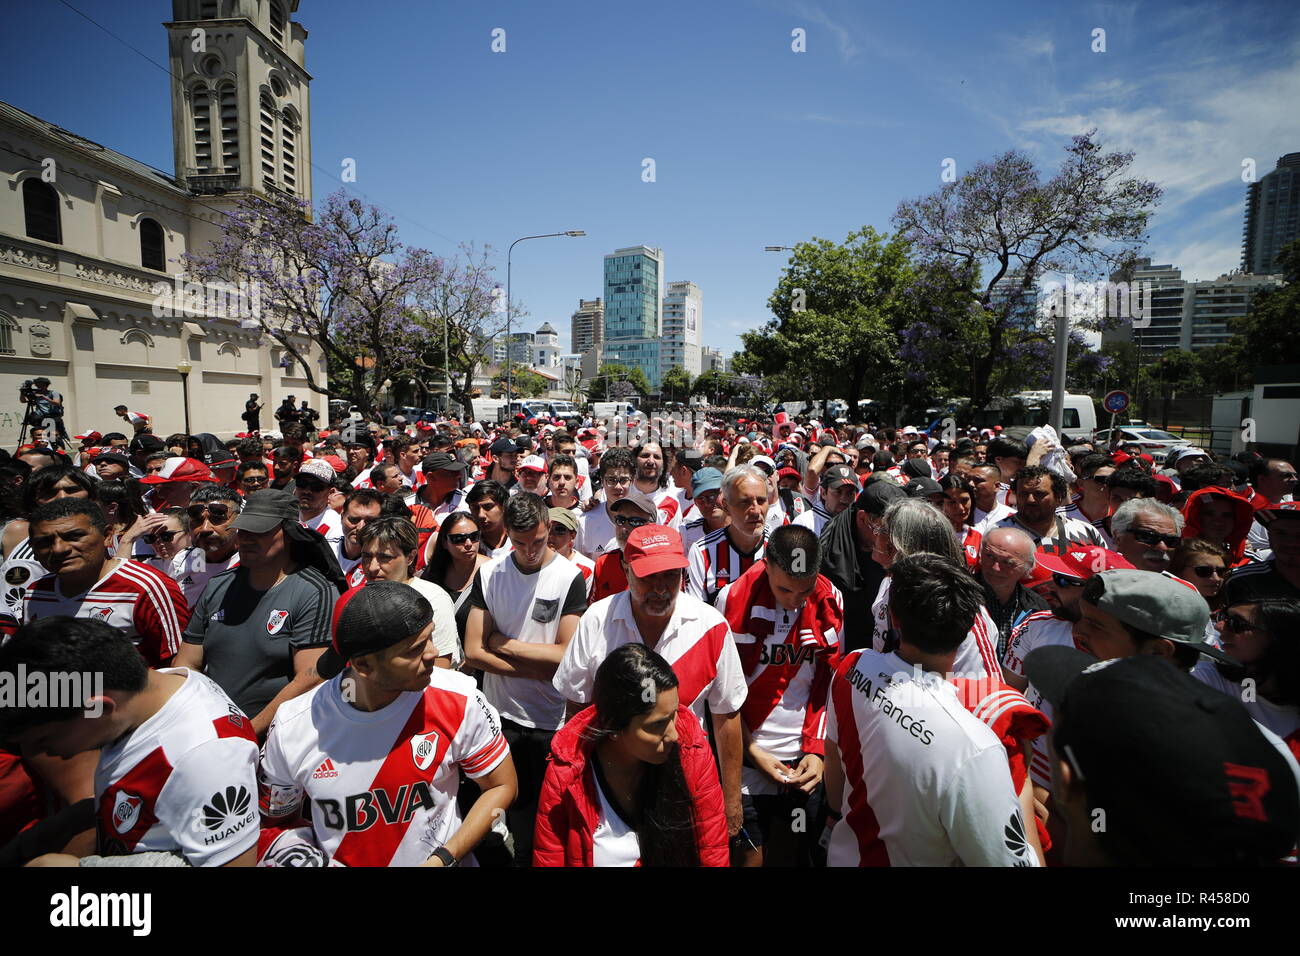 Buenos Aires, Argentina. 24th Nov, 2018. Soccer: South America, final Copa de Libertadores: River Plate - Boca Juniors, return match. Fans of River Plate are waiting outside the stadium. The Copa Libertadores final between Argentinian rivals River Plate and Boca Juniors has once again been postponed. The match in Buenos Aires was postponed to an unspecified date at the request of Boca Juniors after the serious riots. Credit: Gustavo Ortiz/dpa/Alamy Live News Stock Photo